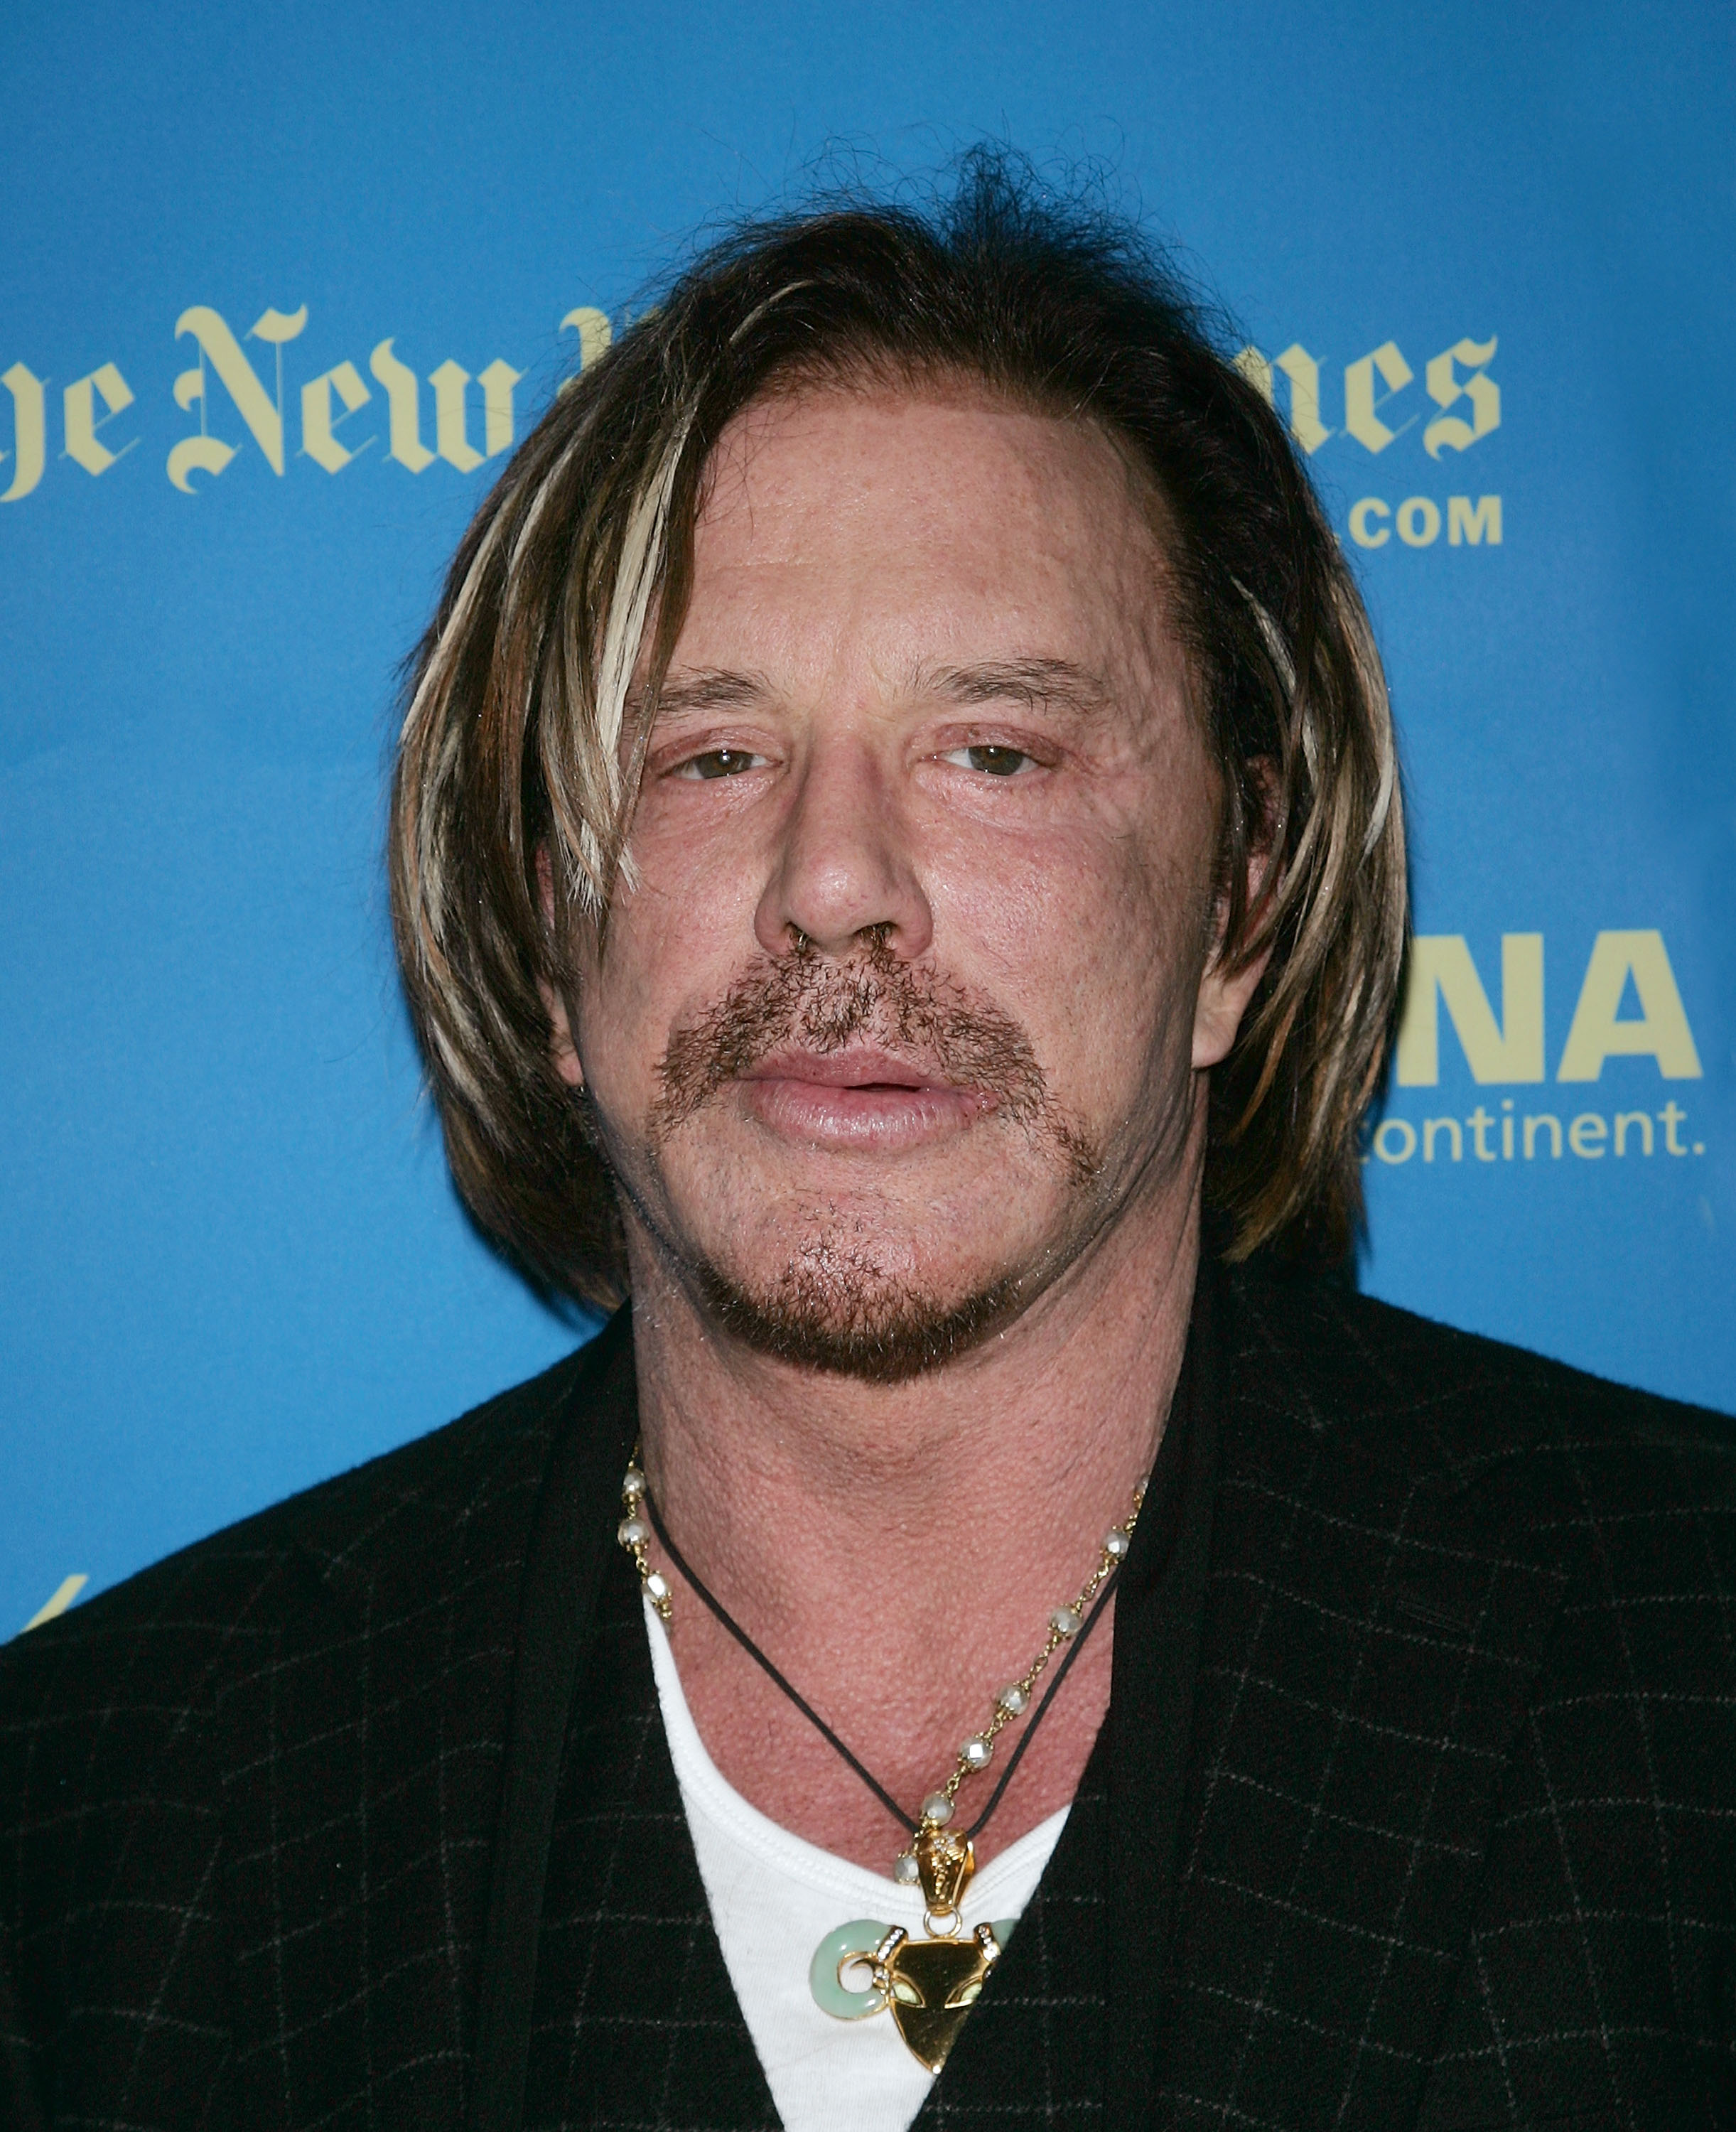 Mickey Rourke at the 46th New York Film Festival screening of "The Wrestler" on October 12, 2008 in New York City. | Source: Getty Images